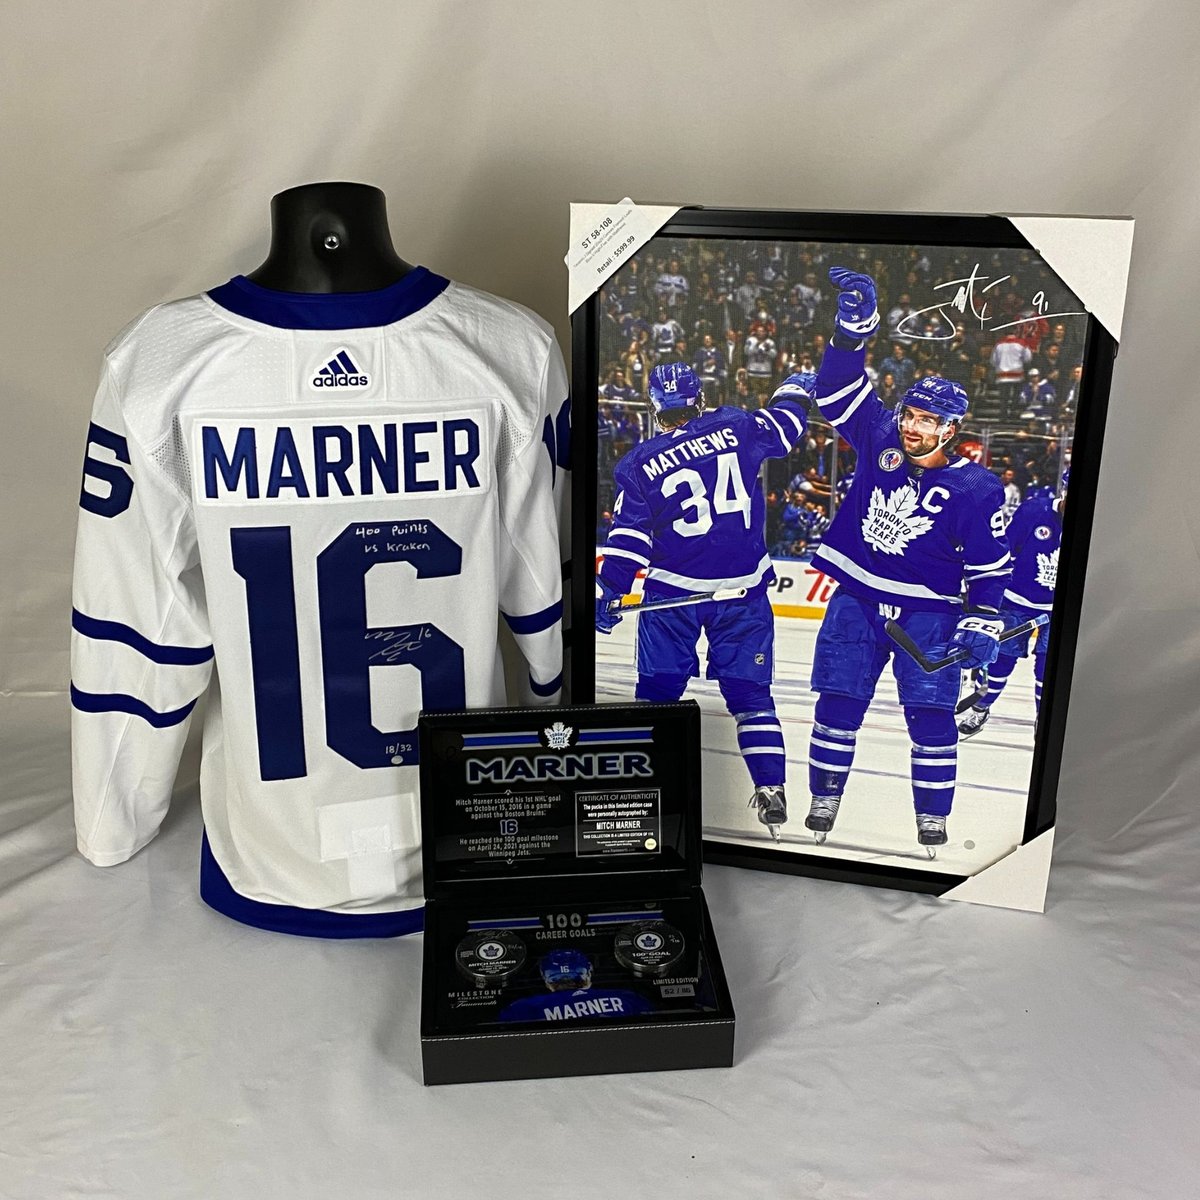 Mitch Marner sent back to OHL's Knights by Leafs, who sign Brad Boyes